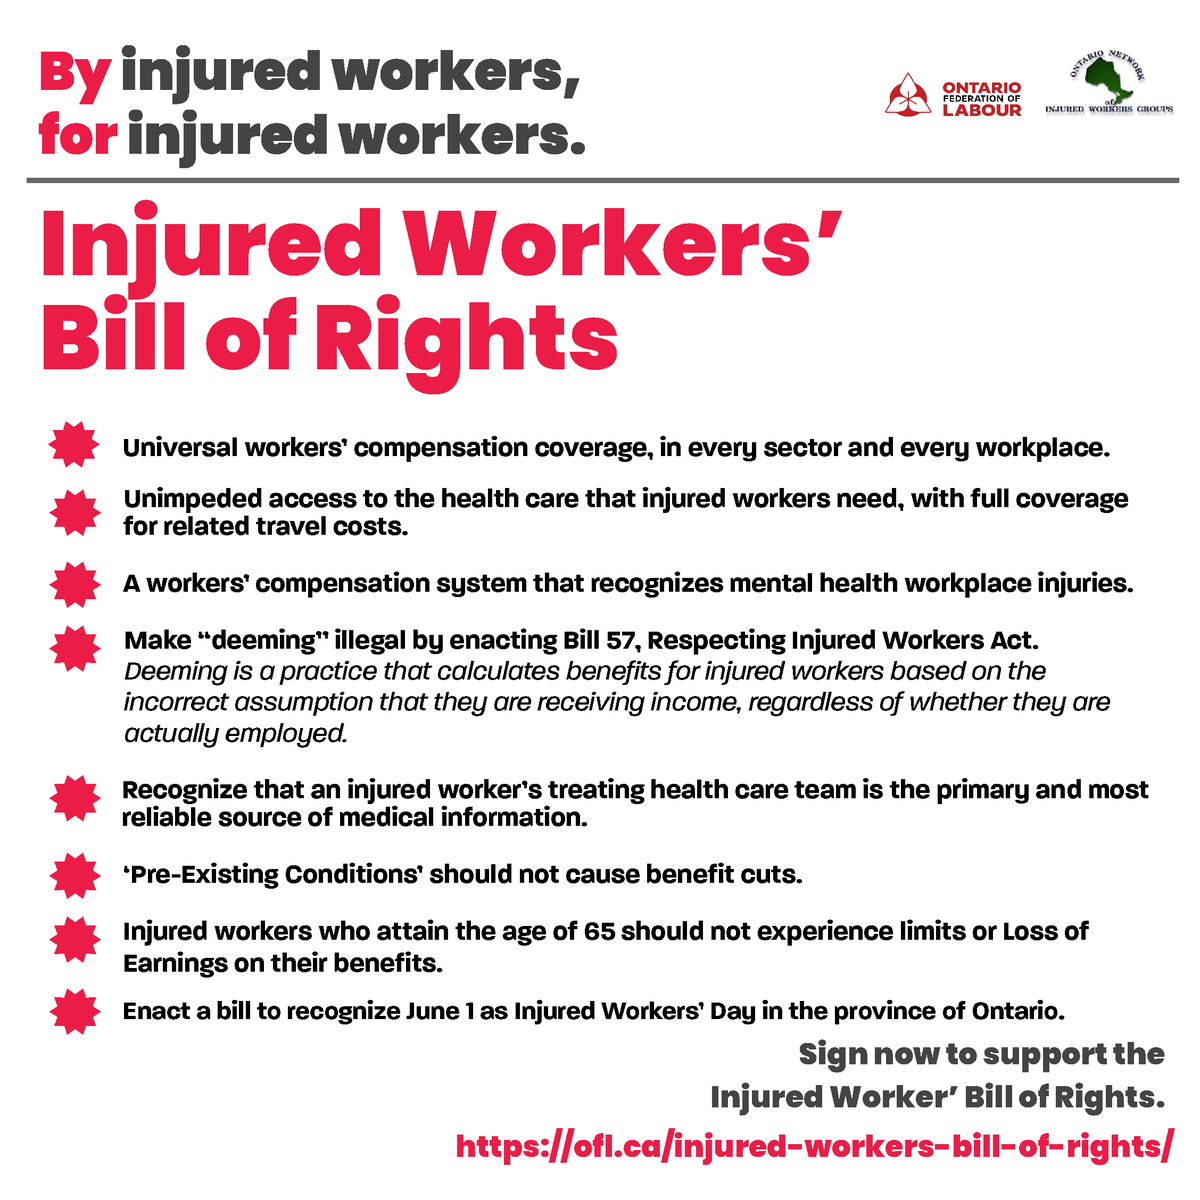 Workers are STILL calling on the Ford gov to guarantee the MINIMUM rights to ensure just & non-discriminatory treatment for #InjuredWorkers! Sign the bill of rights & add your name to the cause ▶️ bit.ly/4duVe7v @OFLabour #ISupportInjuredWorkers #OnLab #OnPoli #OSSTF